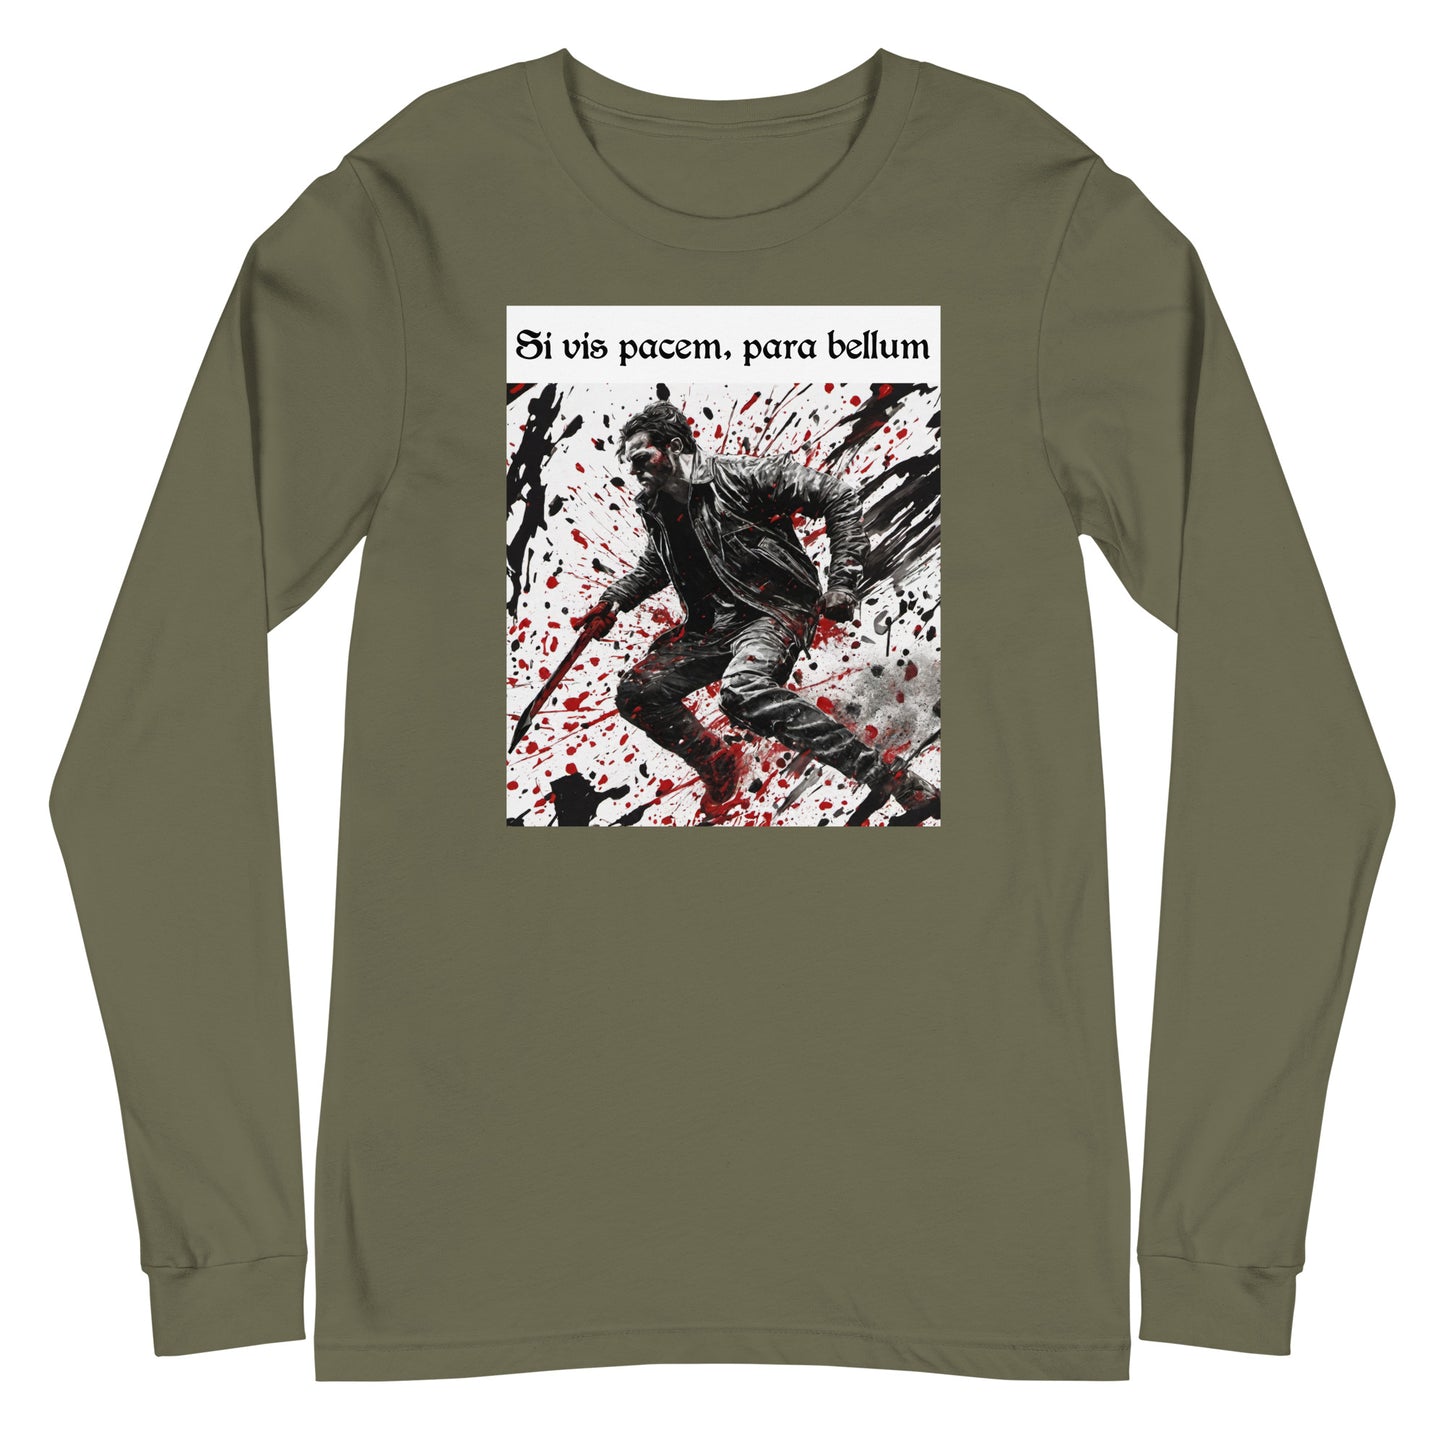 If You Want Peace, Prepare for War Men's Long Sleeve Tee Military Green